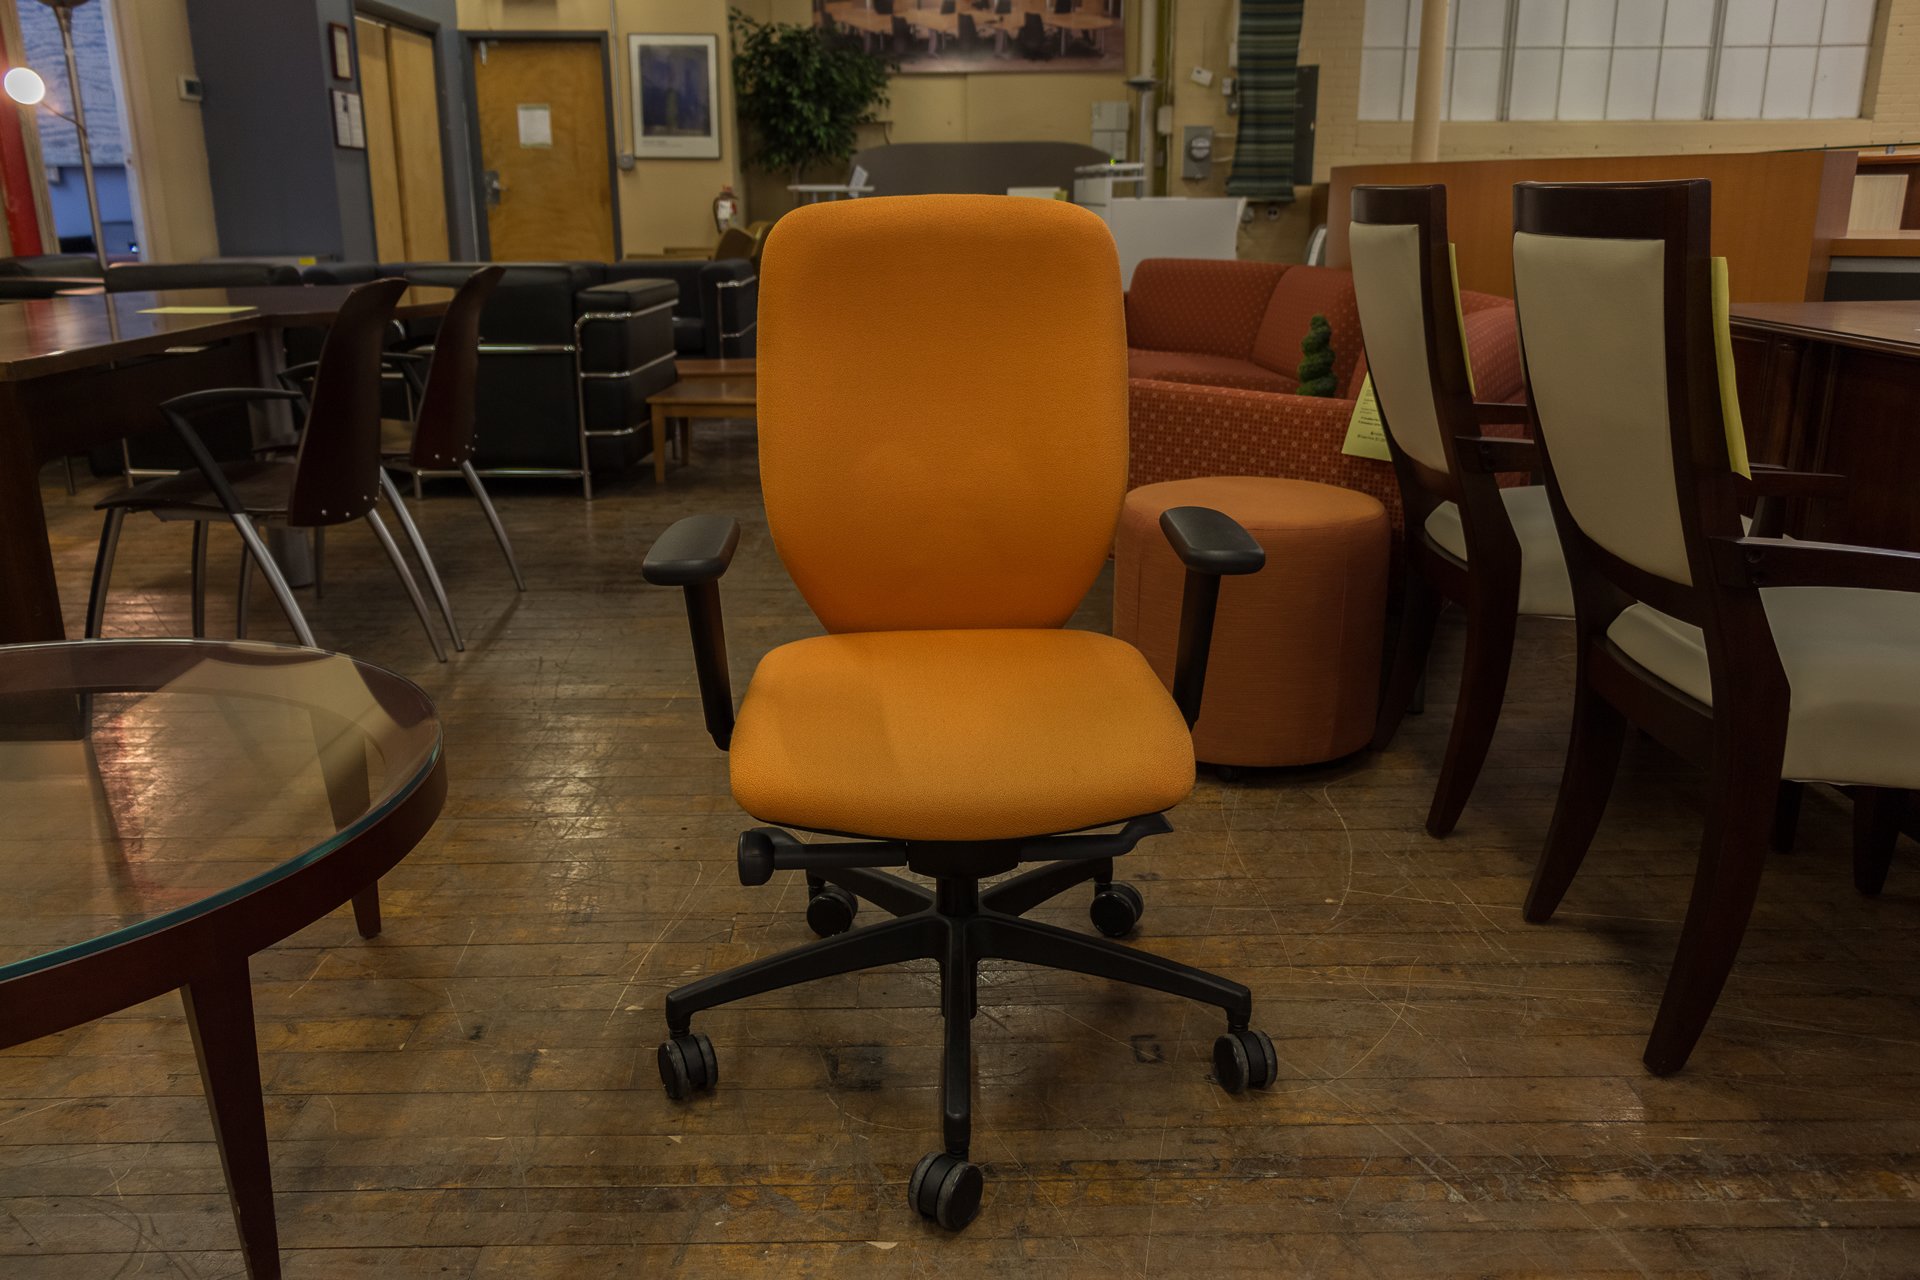 peartreeofficefurniture_peartreeofficefurniture_peartreeofficefurniture_boss-design-multi-function-task-chairs-in-red-blue-and-orange.jpg